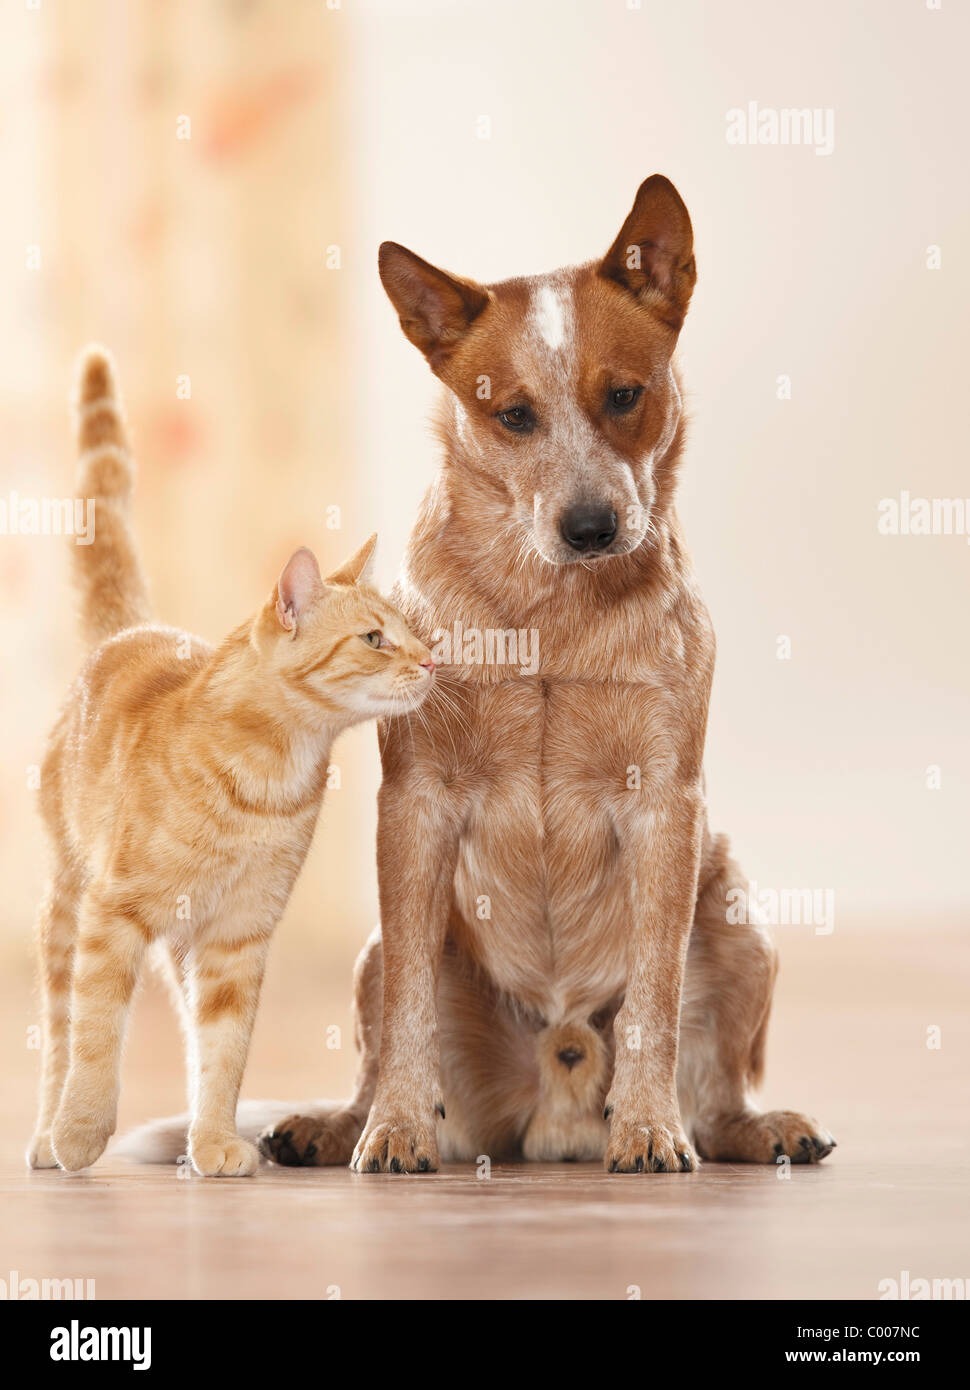 animal : domestic and Cattle dog Stock Photo - Alamy